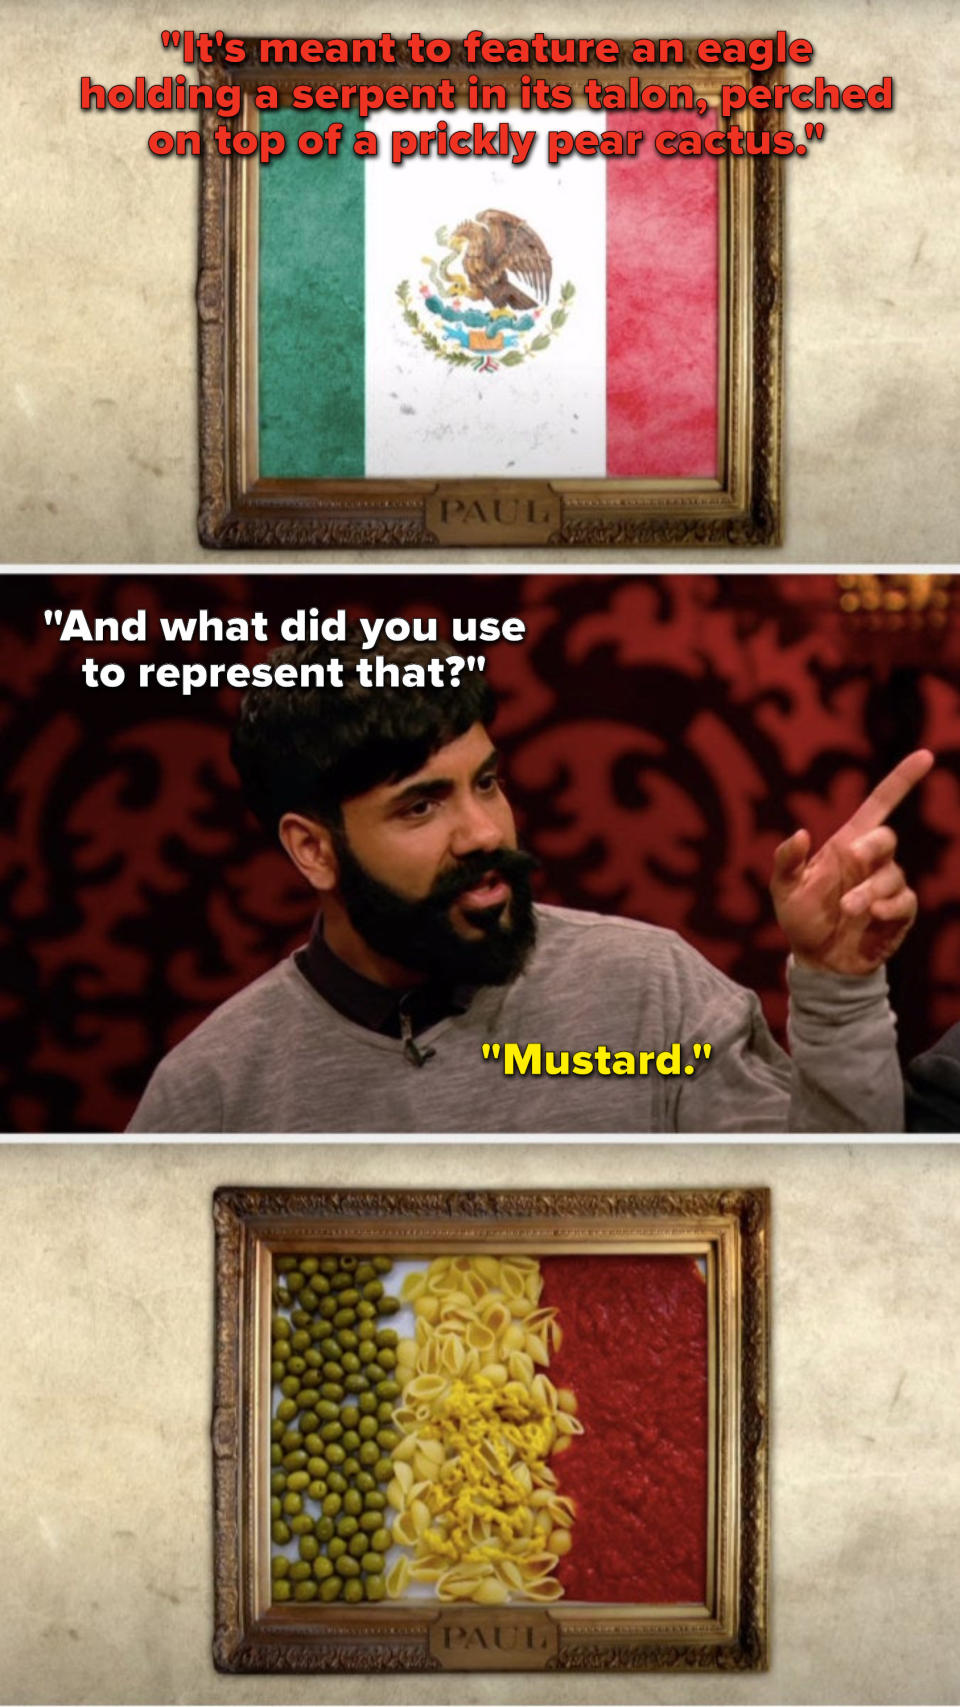 Alex says, "It's meant to feature an eagle holding a serpent in its talon, perched on top of a prickly pear cactus," and Greg says, "And what did you use to represent that," to Paul Chowdhry, and we look at his very inaccurate Mexican flag